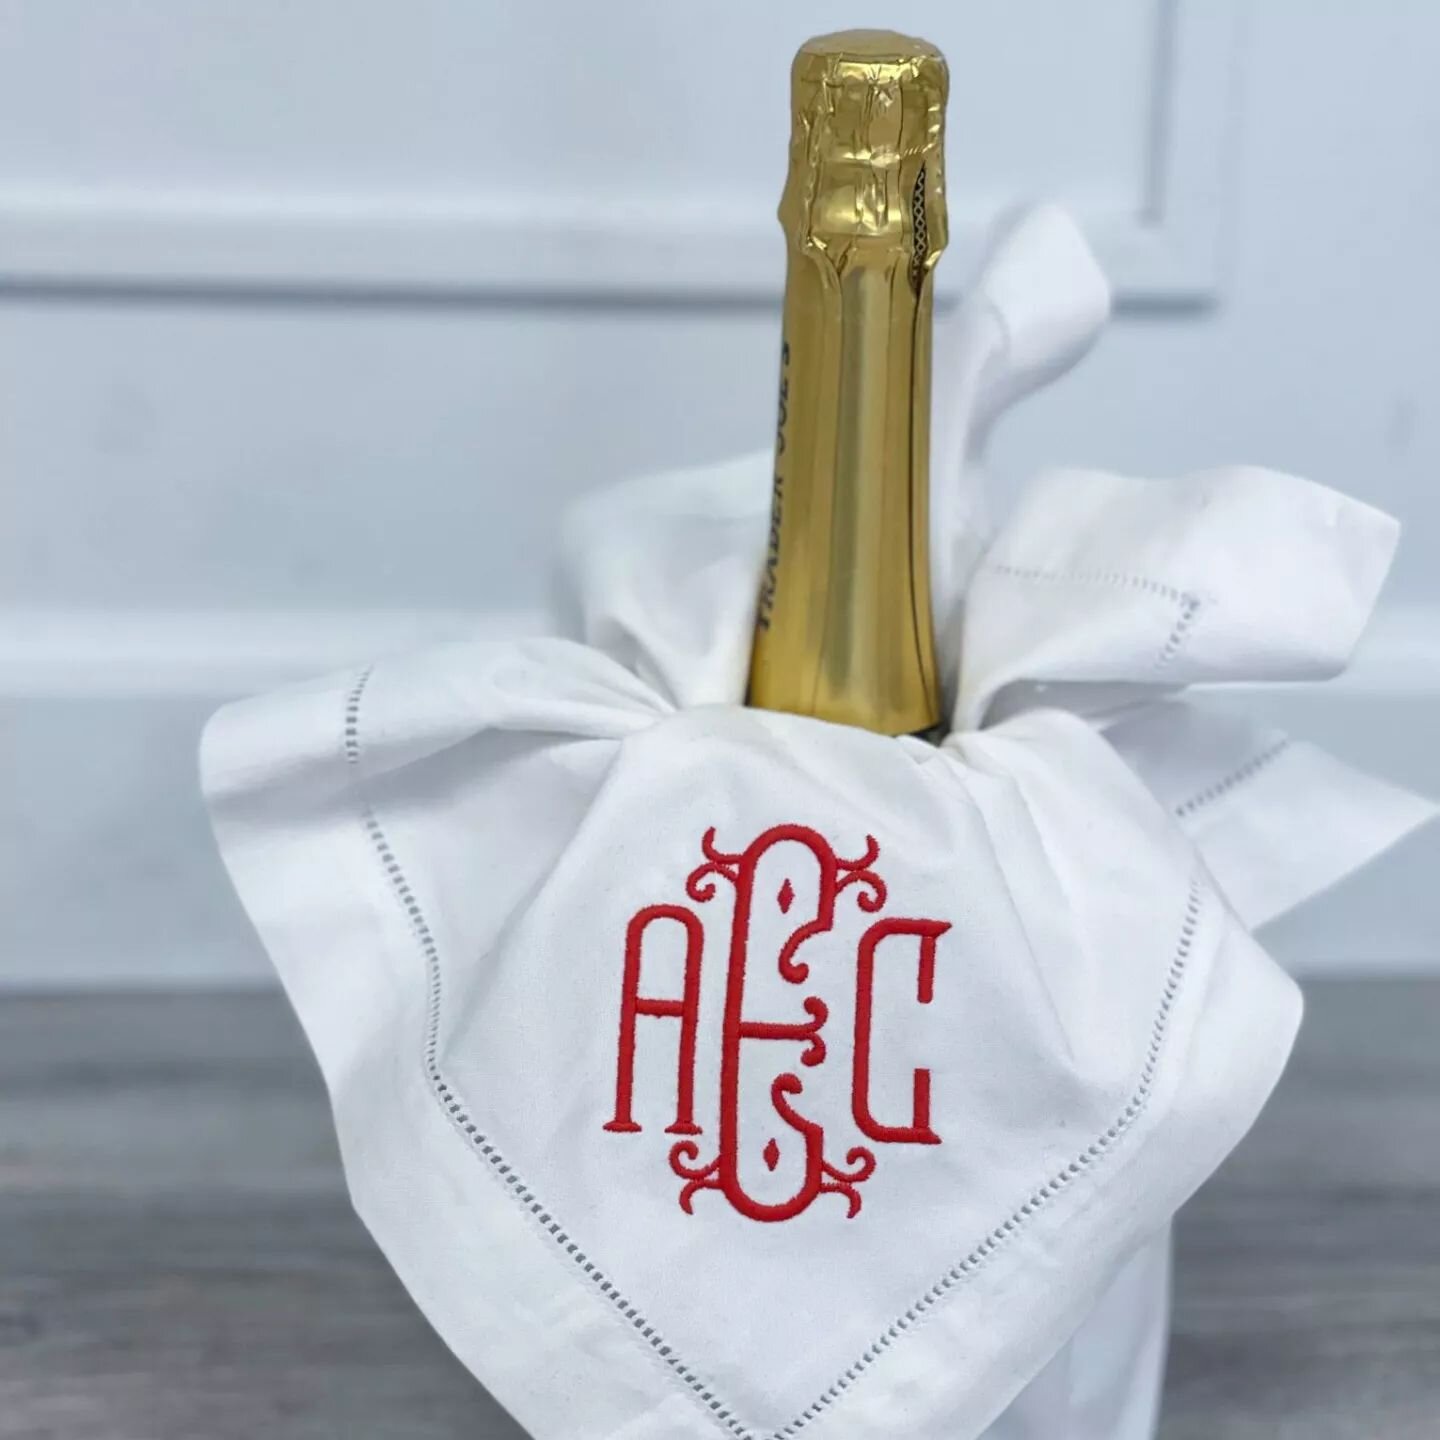 Giving your dining room an elegant aesthetic can be as easy as using a set of embroidered napkins for your table! We have hundreds of thread colors and fonts to get that perfect look that you want! You can also bring us your table linens and we'll sh